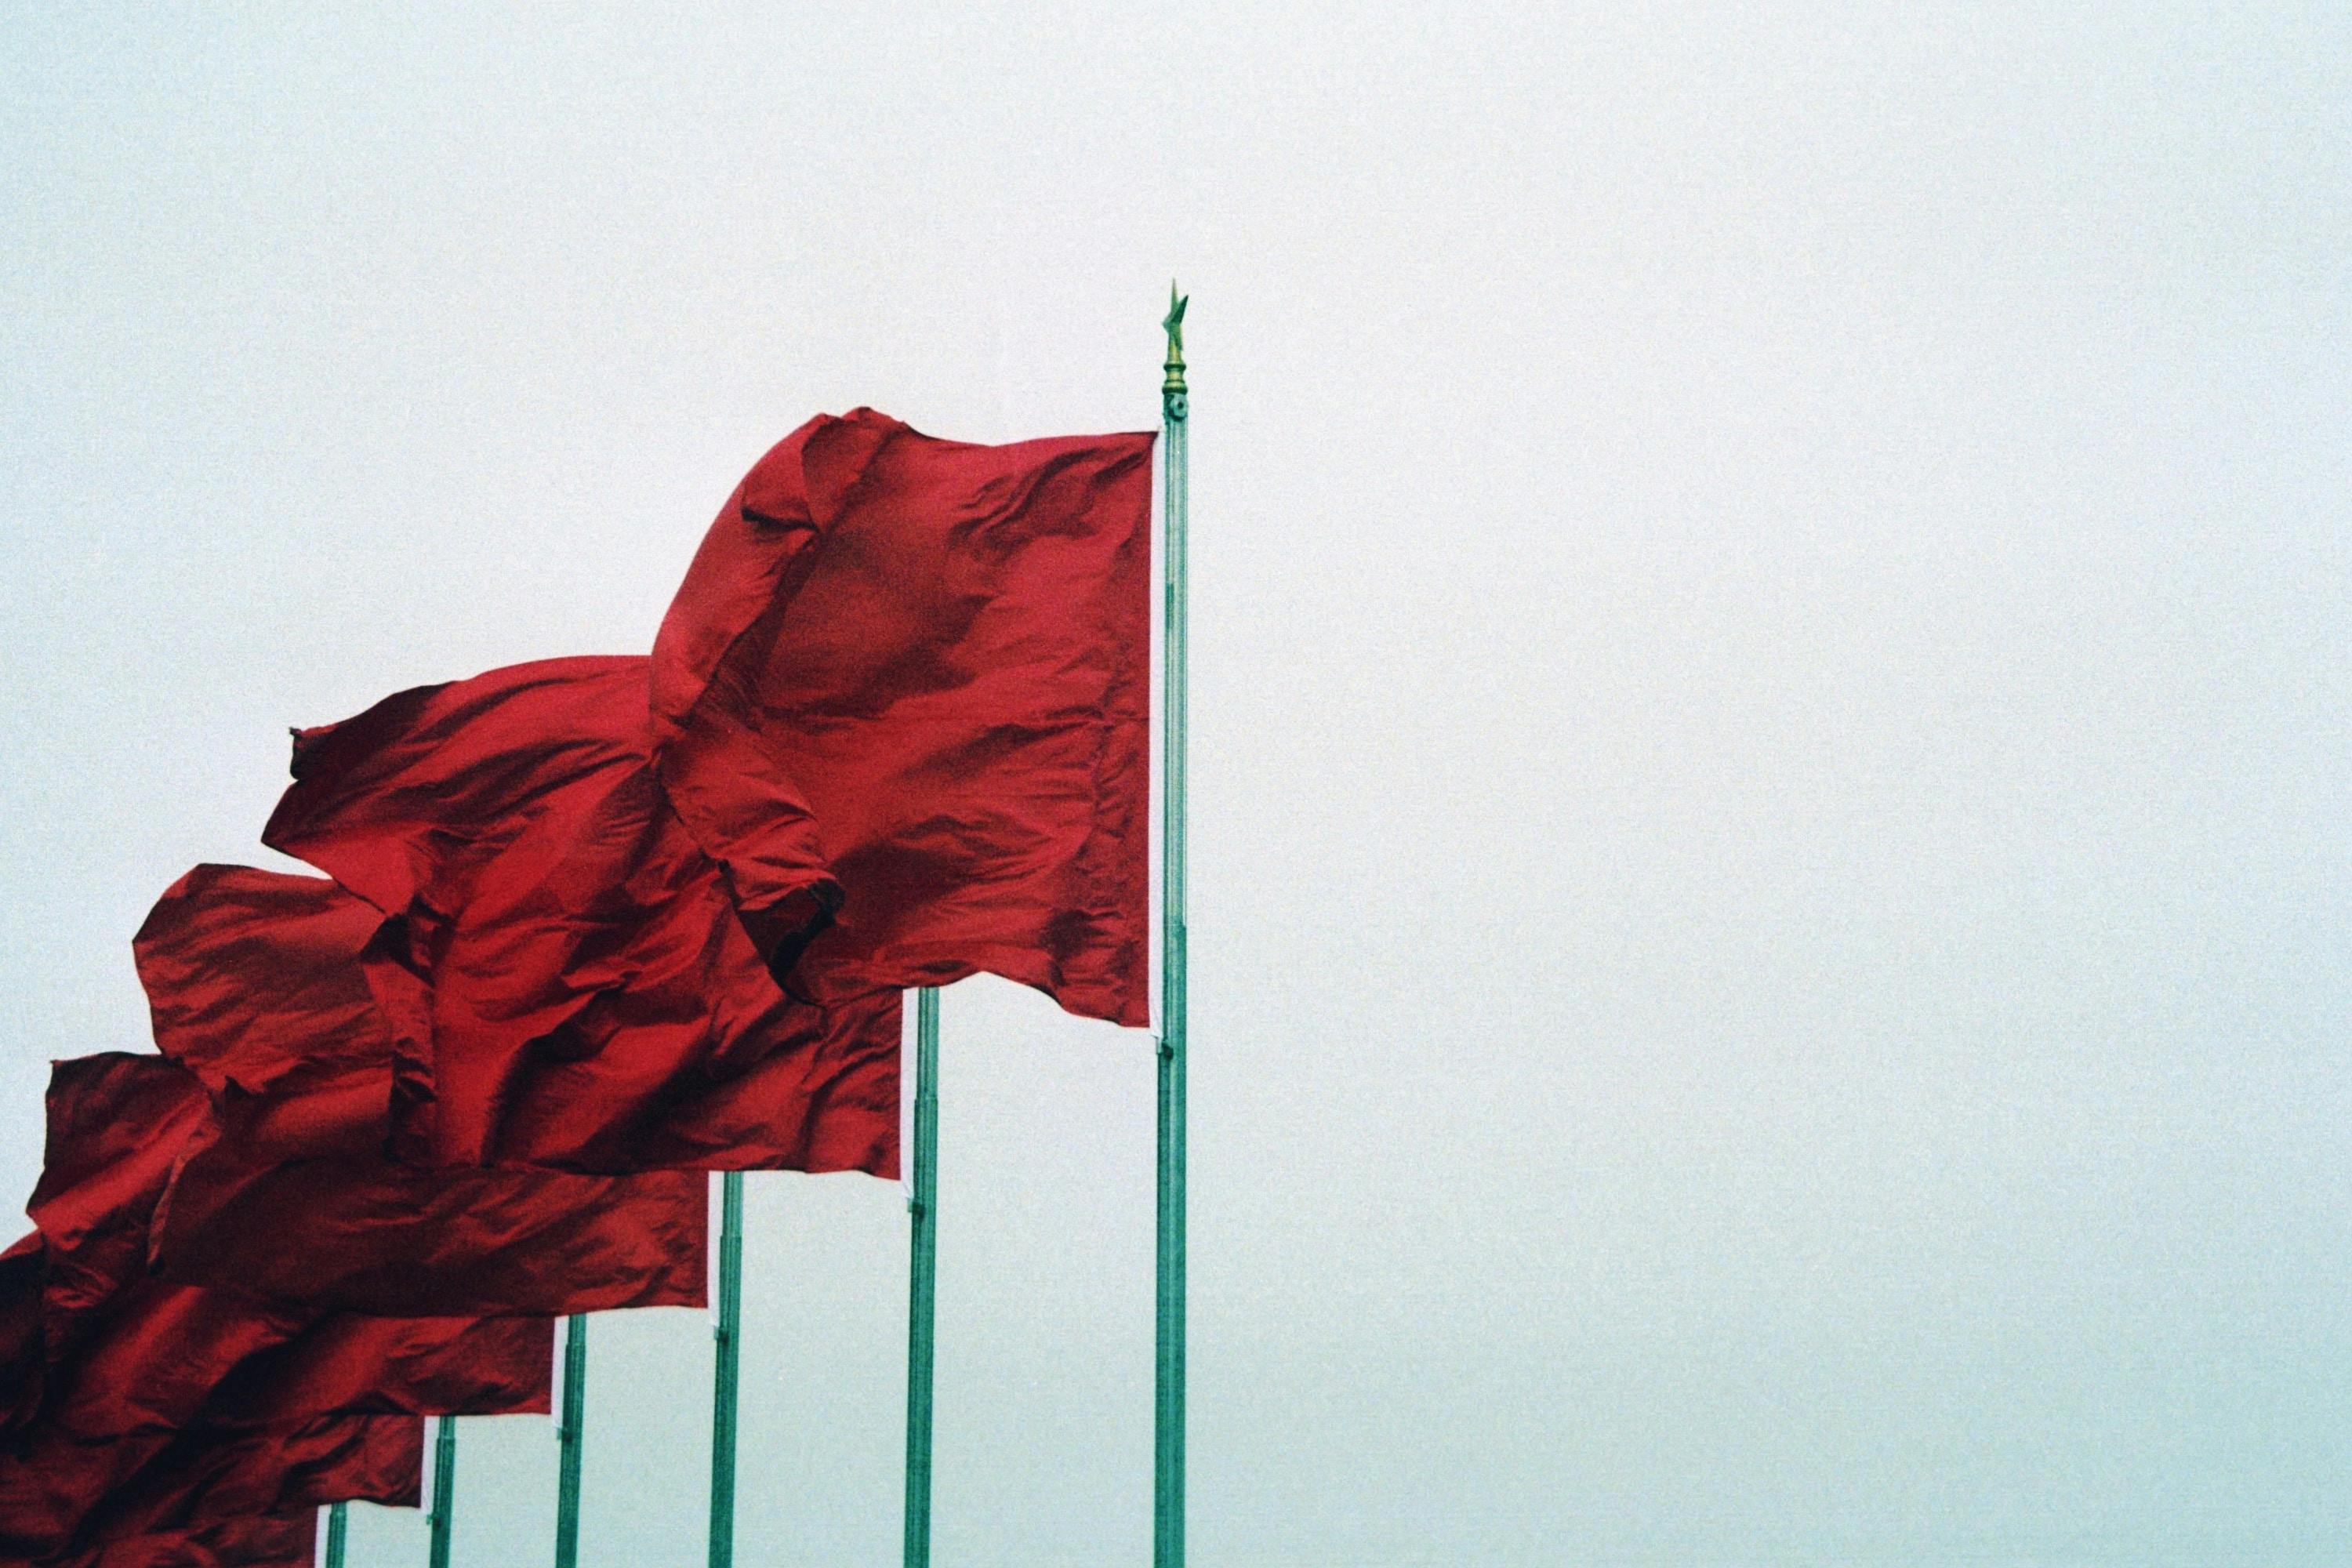 Red flags blowing in the wind